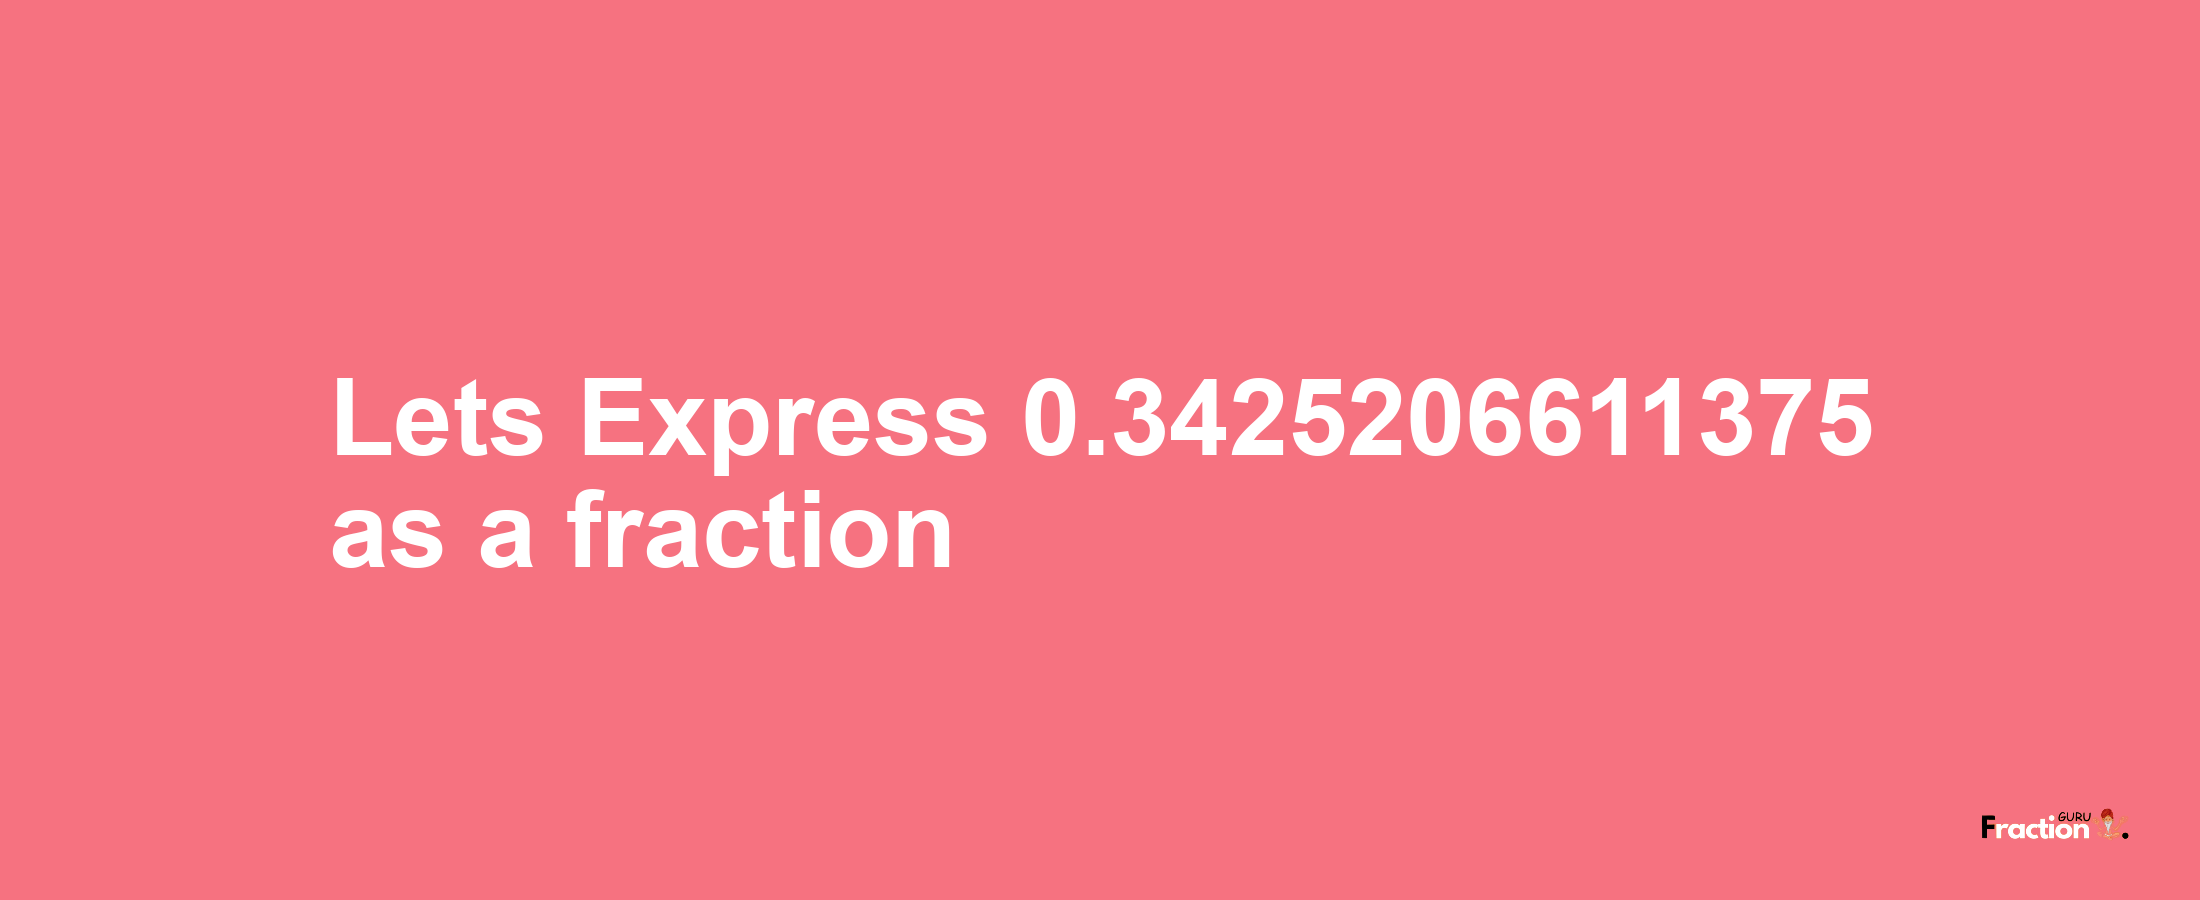 Lets Express 0.3425206611375 as afraction